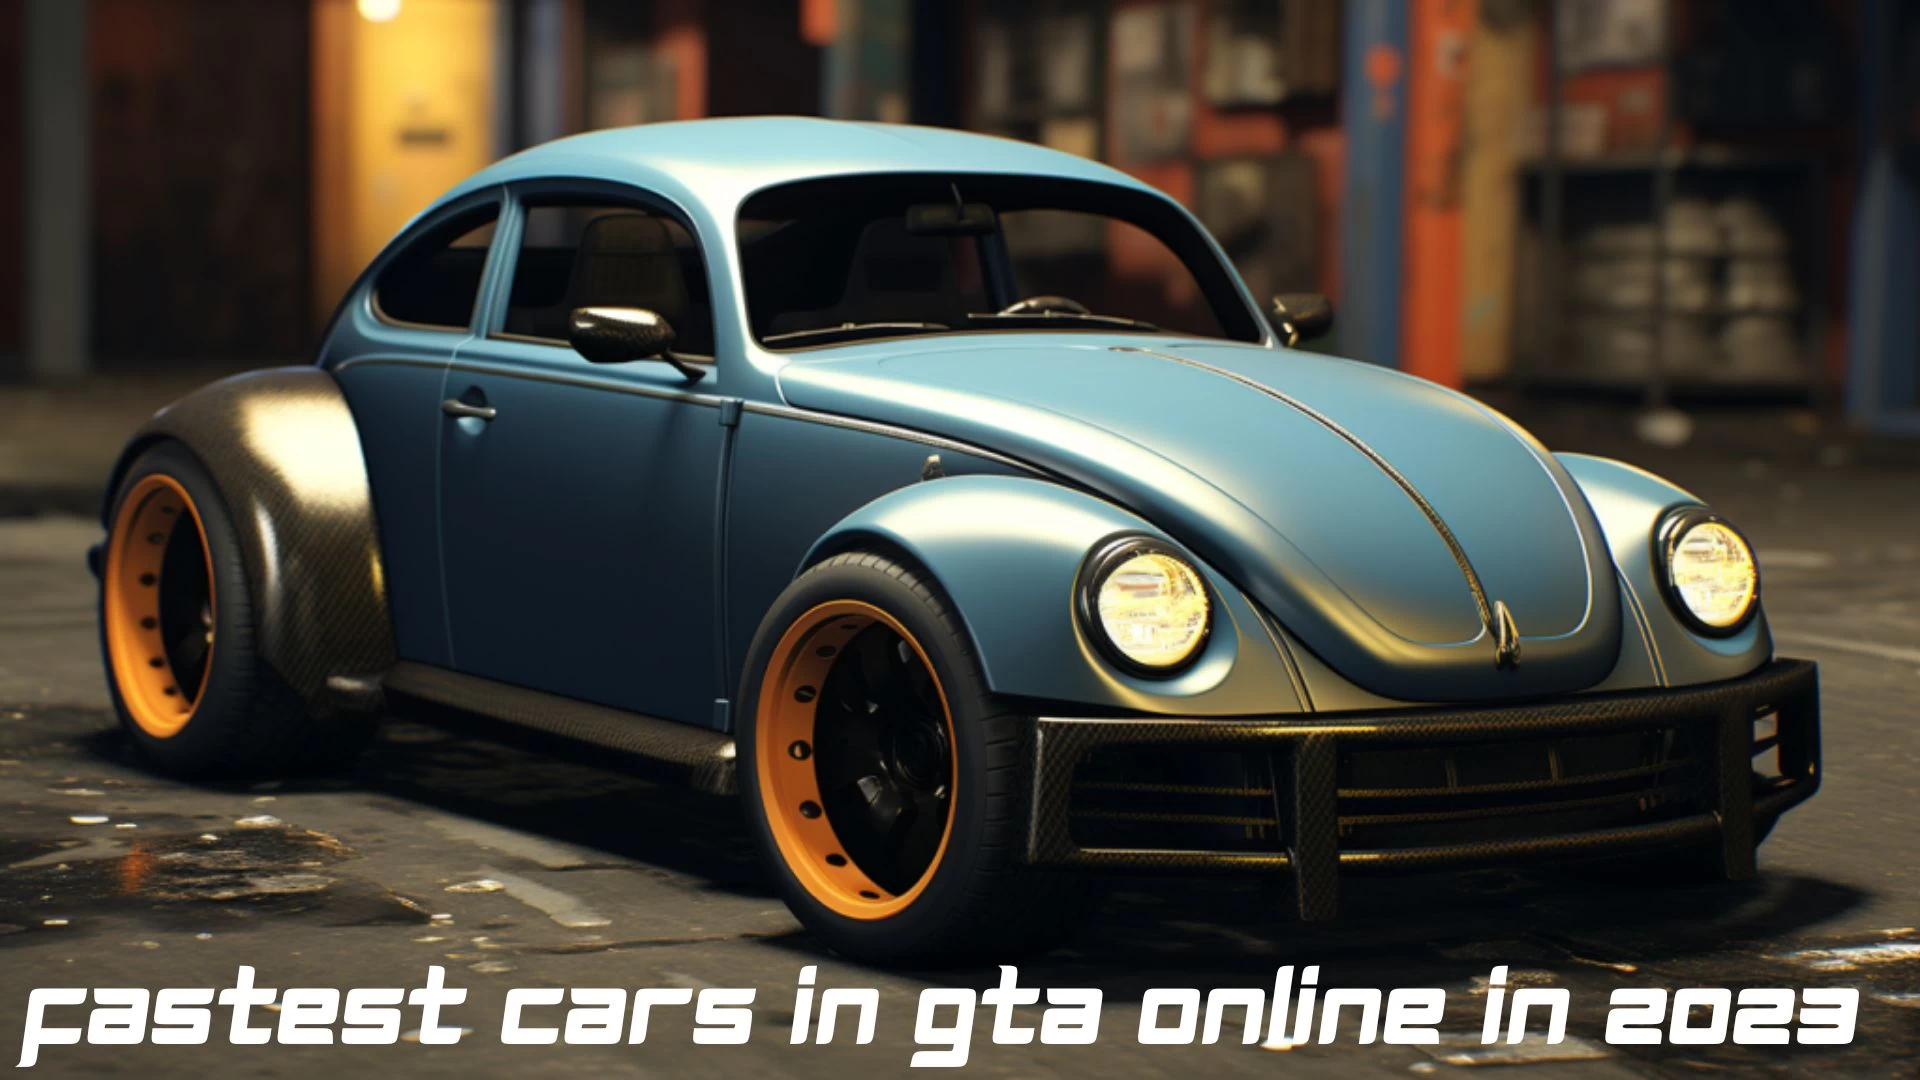 Fastest Cars in GTA Online in 2023 - Top 10 For Racing Experience